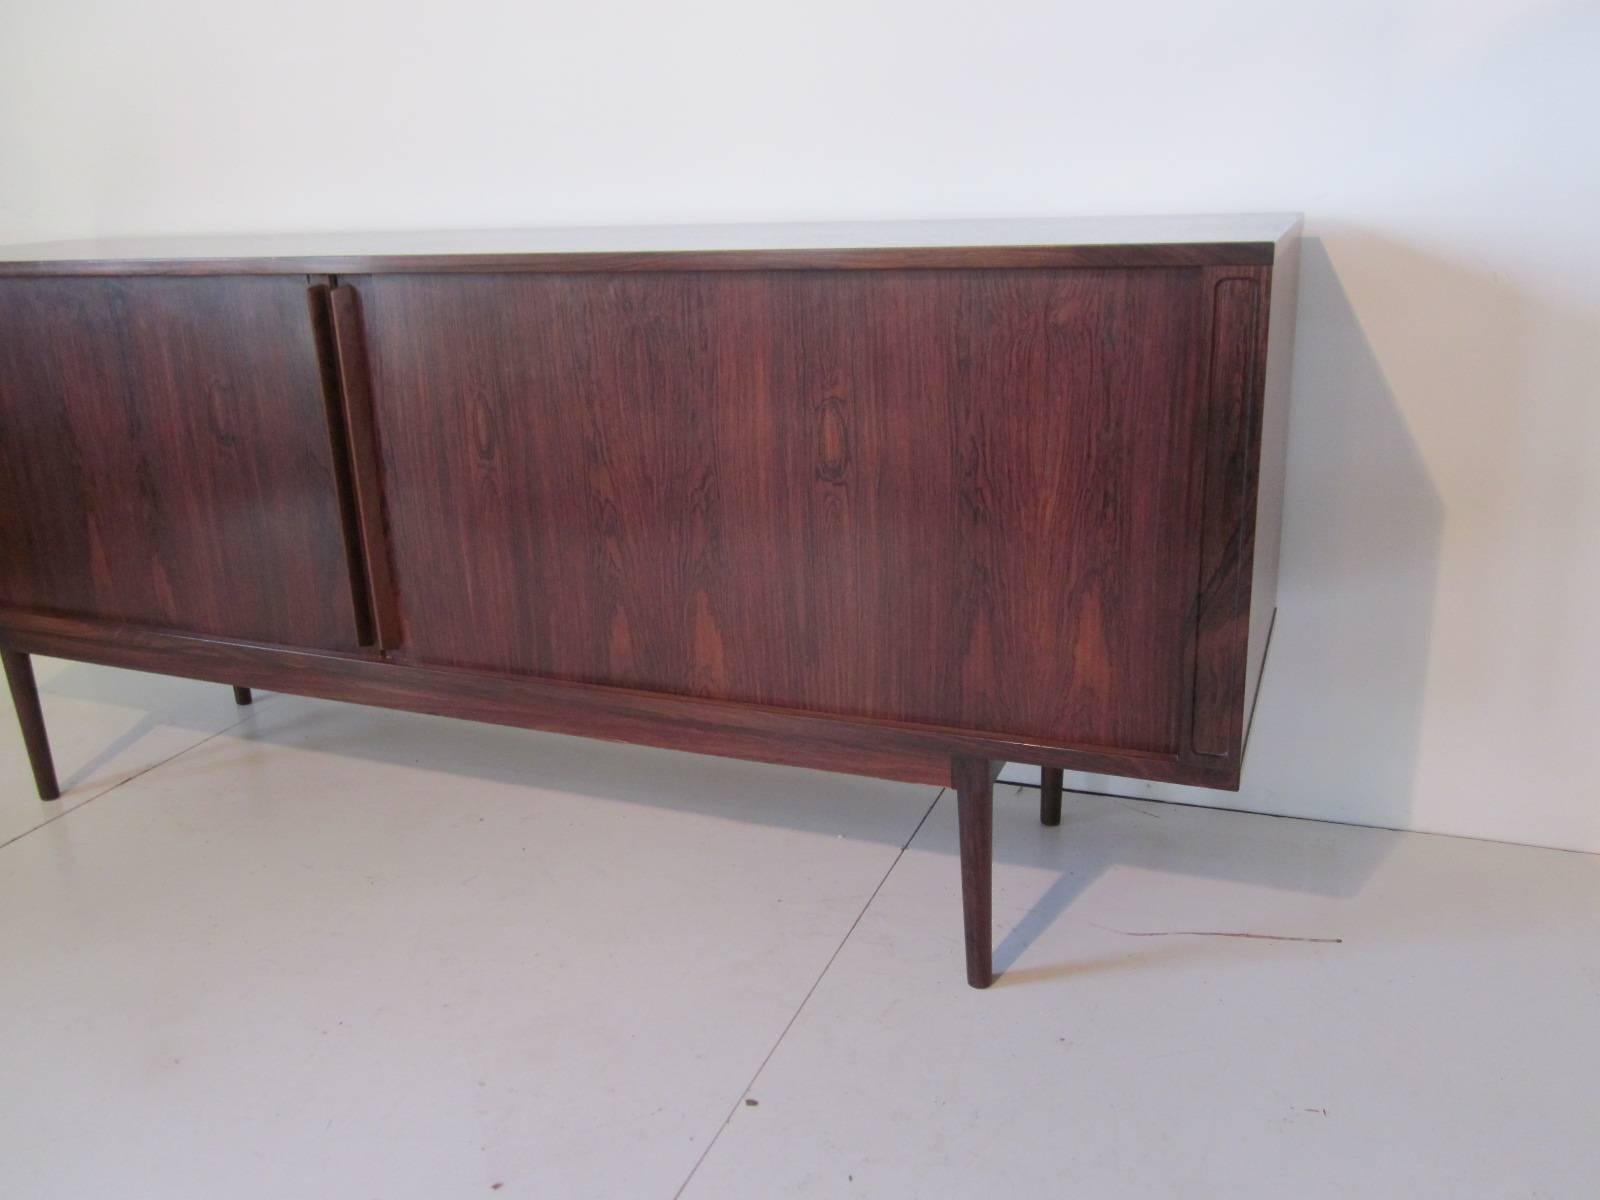 A rich and dark Brazilian rosewood tambor door credenza with five center internal pull-out drawers and storage on each side with a total of three adjustable shelves. Retains the manufactures label to the finished back side, Løvig made in Demark.